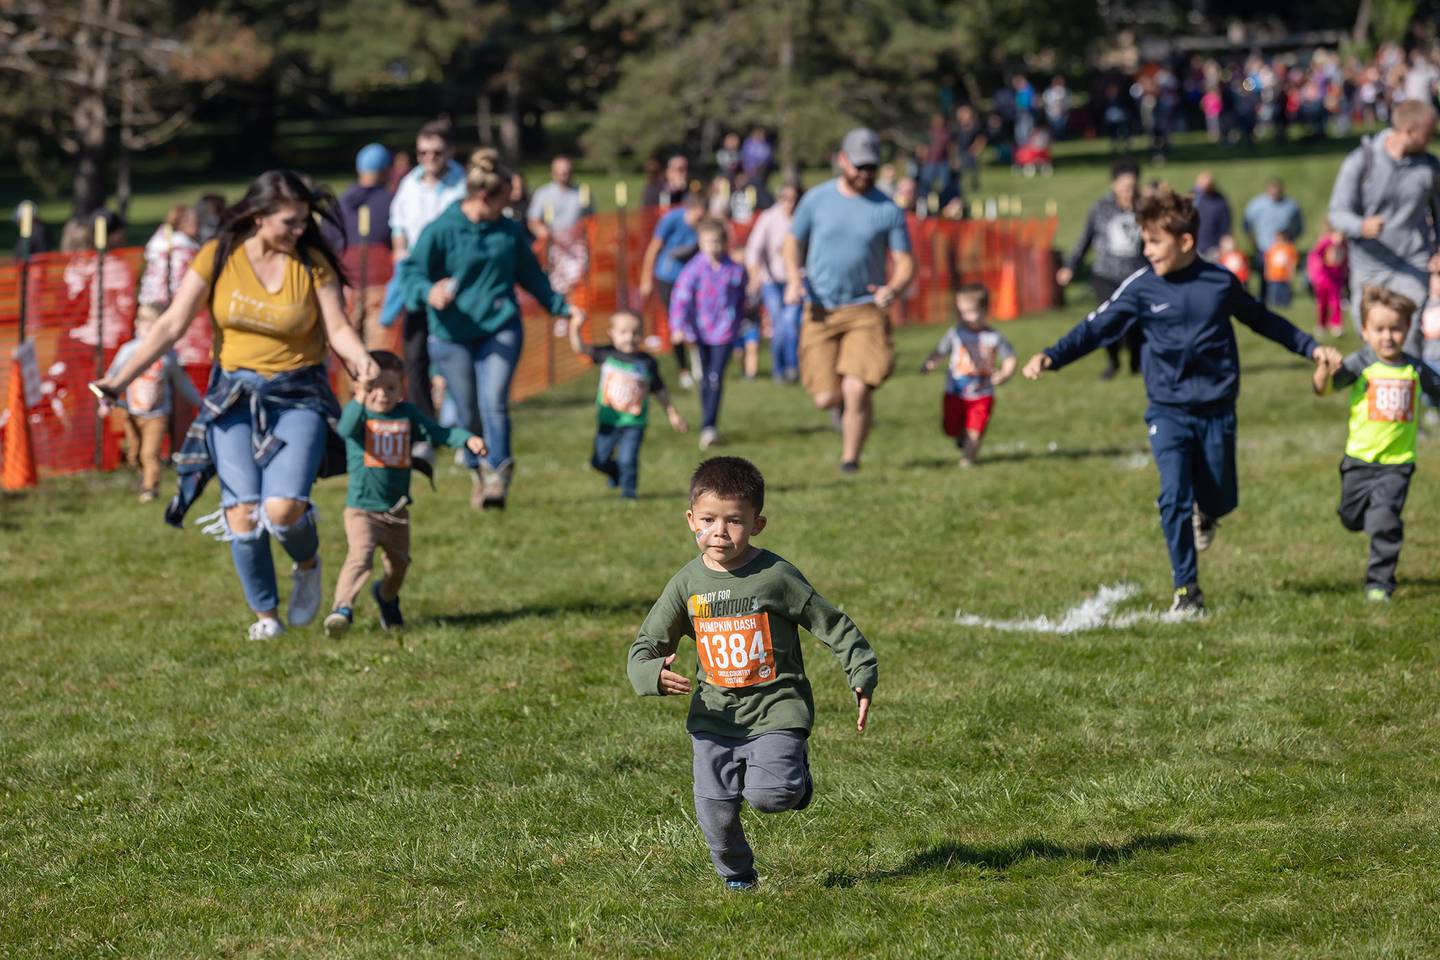 Kids dash for the finish line Saturday, Oct. 1, 2022 during the annual Sterling Park District Pumpkin Dash.